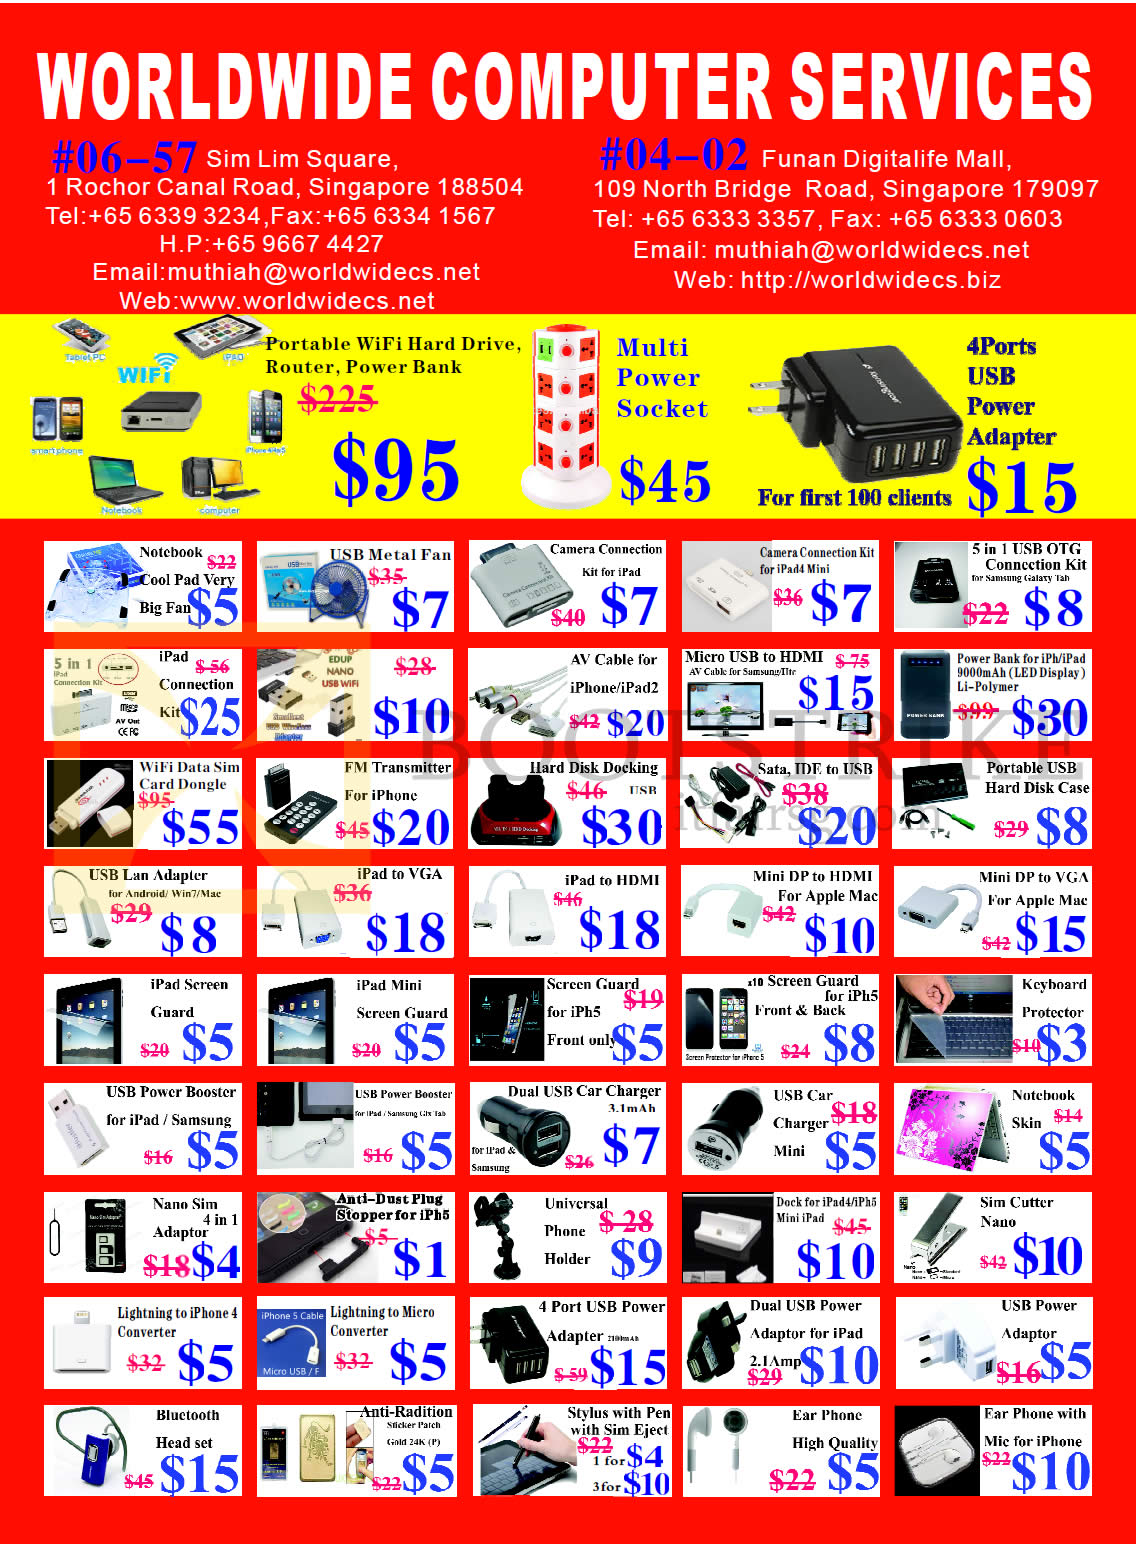 SITEX 2013 price list image brochure of Worldwide Computer Services Accessories, Hard Disk Docking Station, 3G Dongle, FM Transmitter, Powerbank, Notebook Cooler, Screen Protector